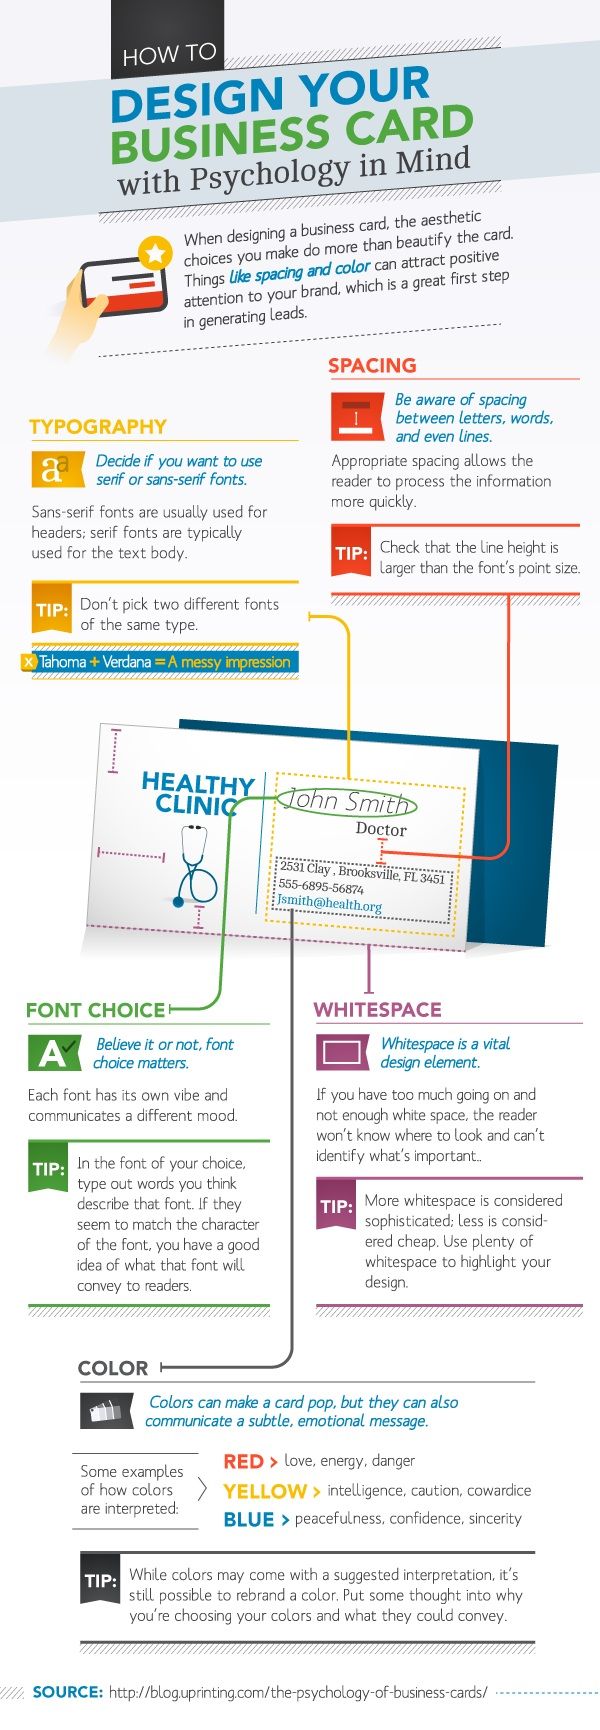 How to Design Your Business Card With Psychology in Mind [Infographic]